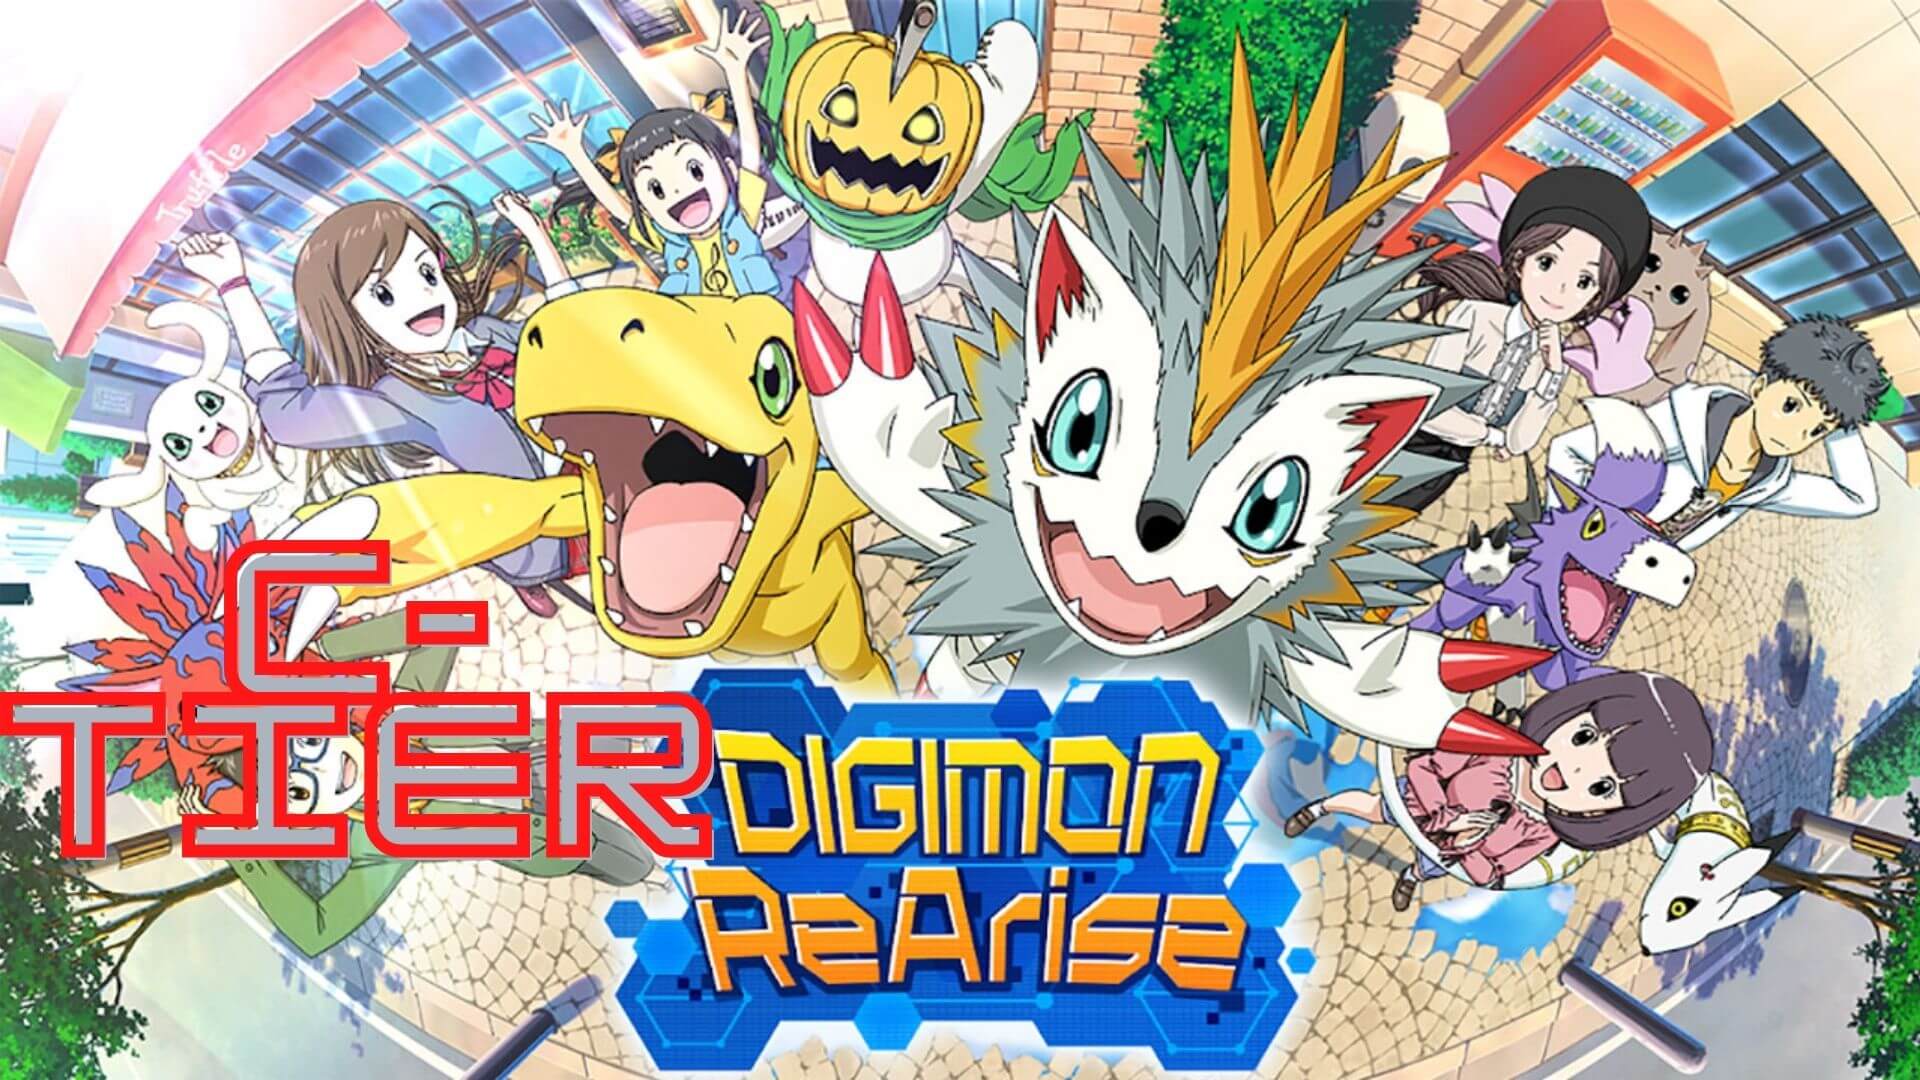 Average characters ranked in Digimon rearise